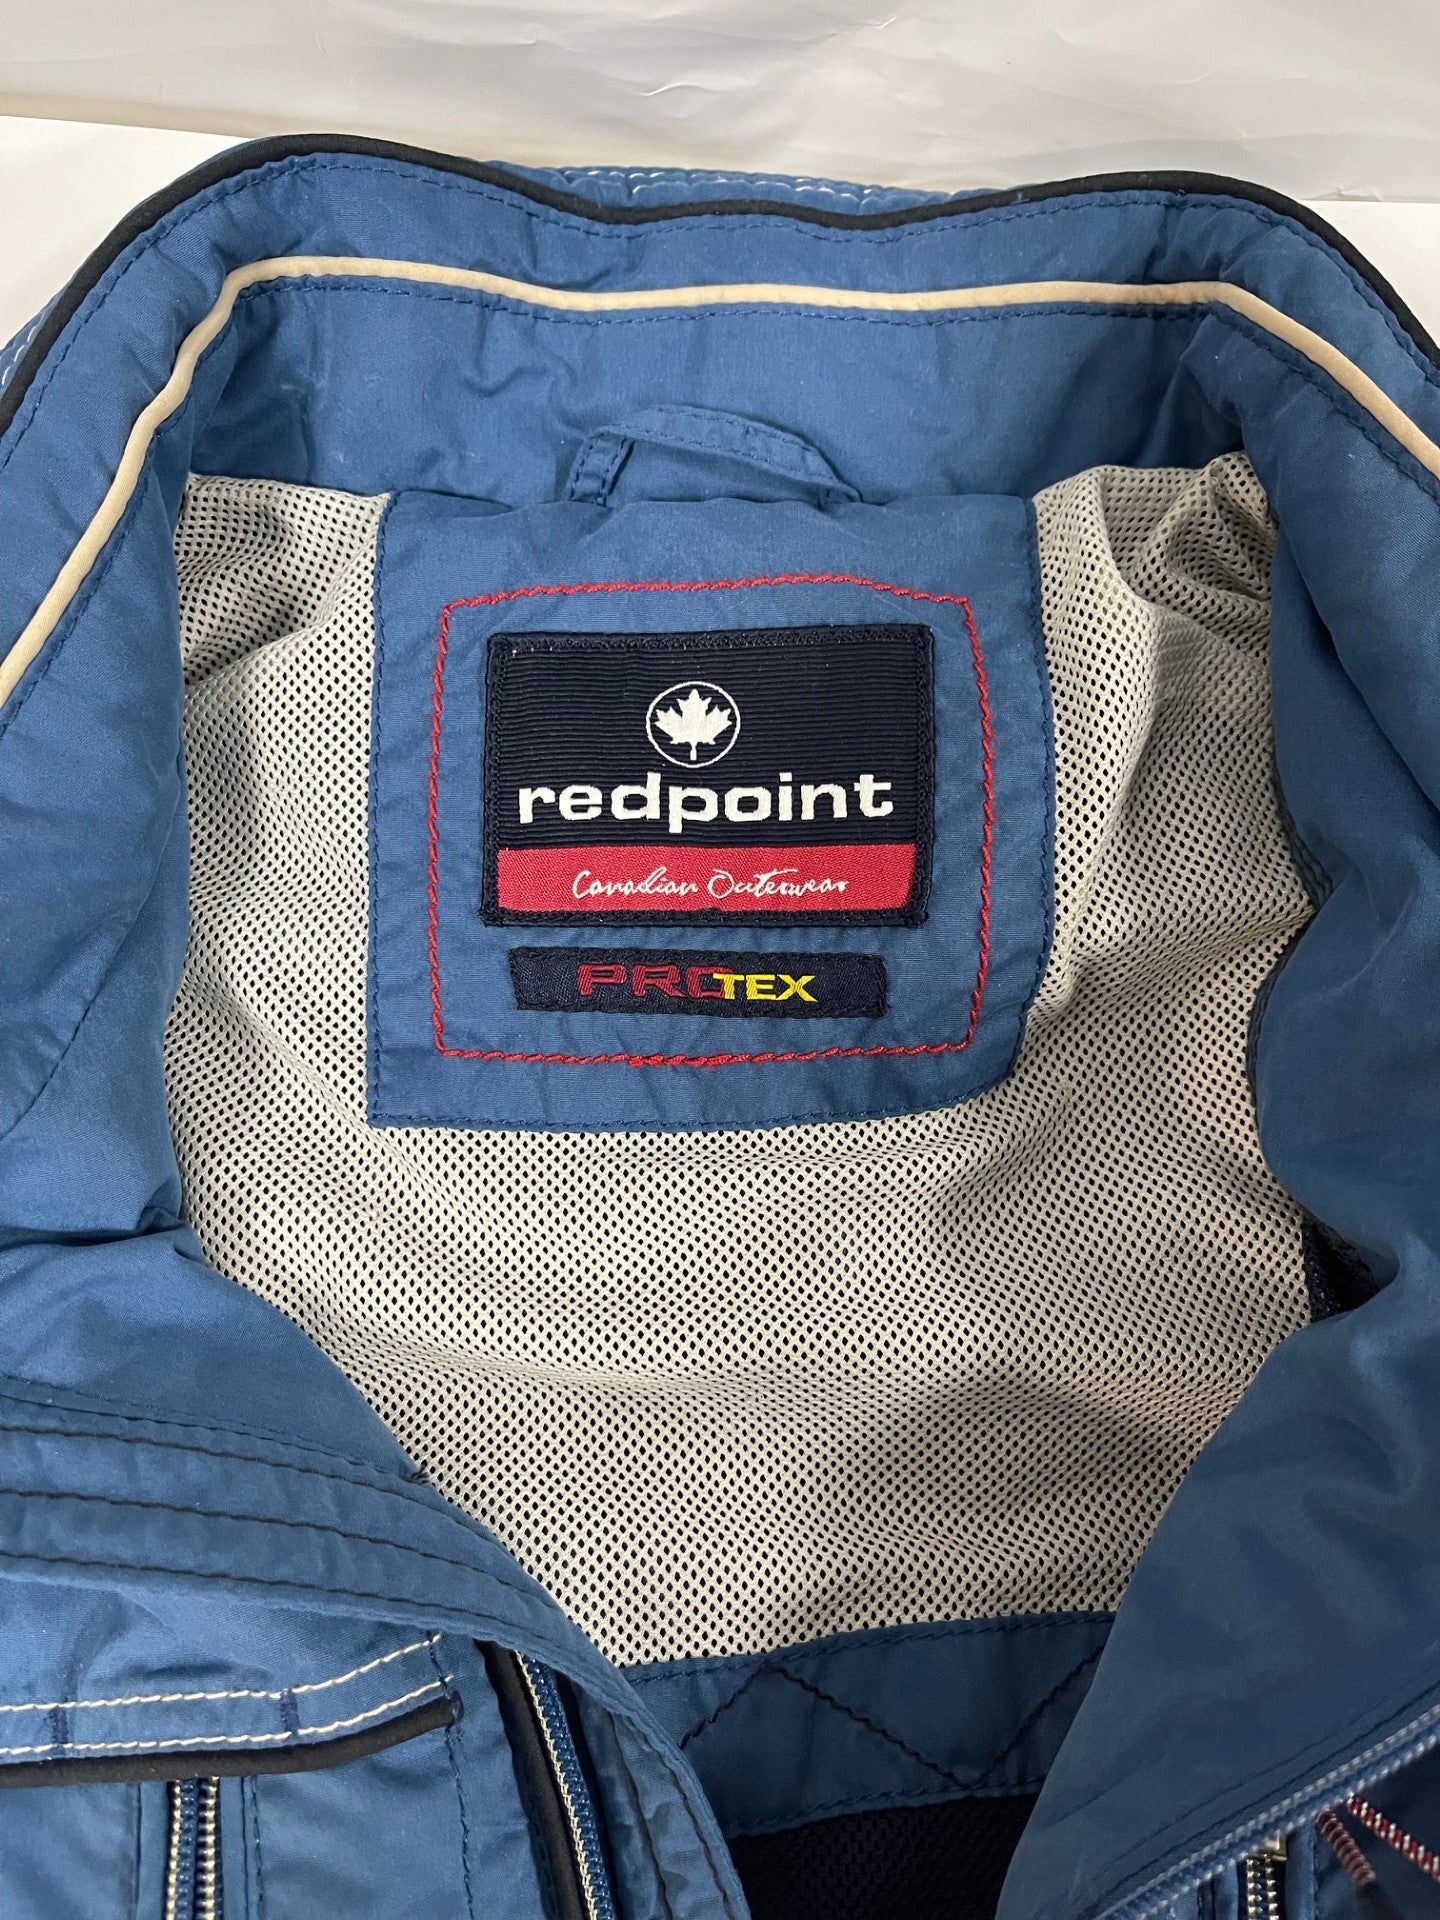 Redpoint Blue Outdoor Jacket Large